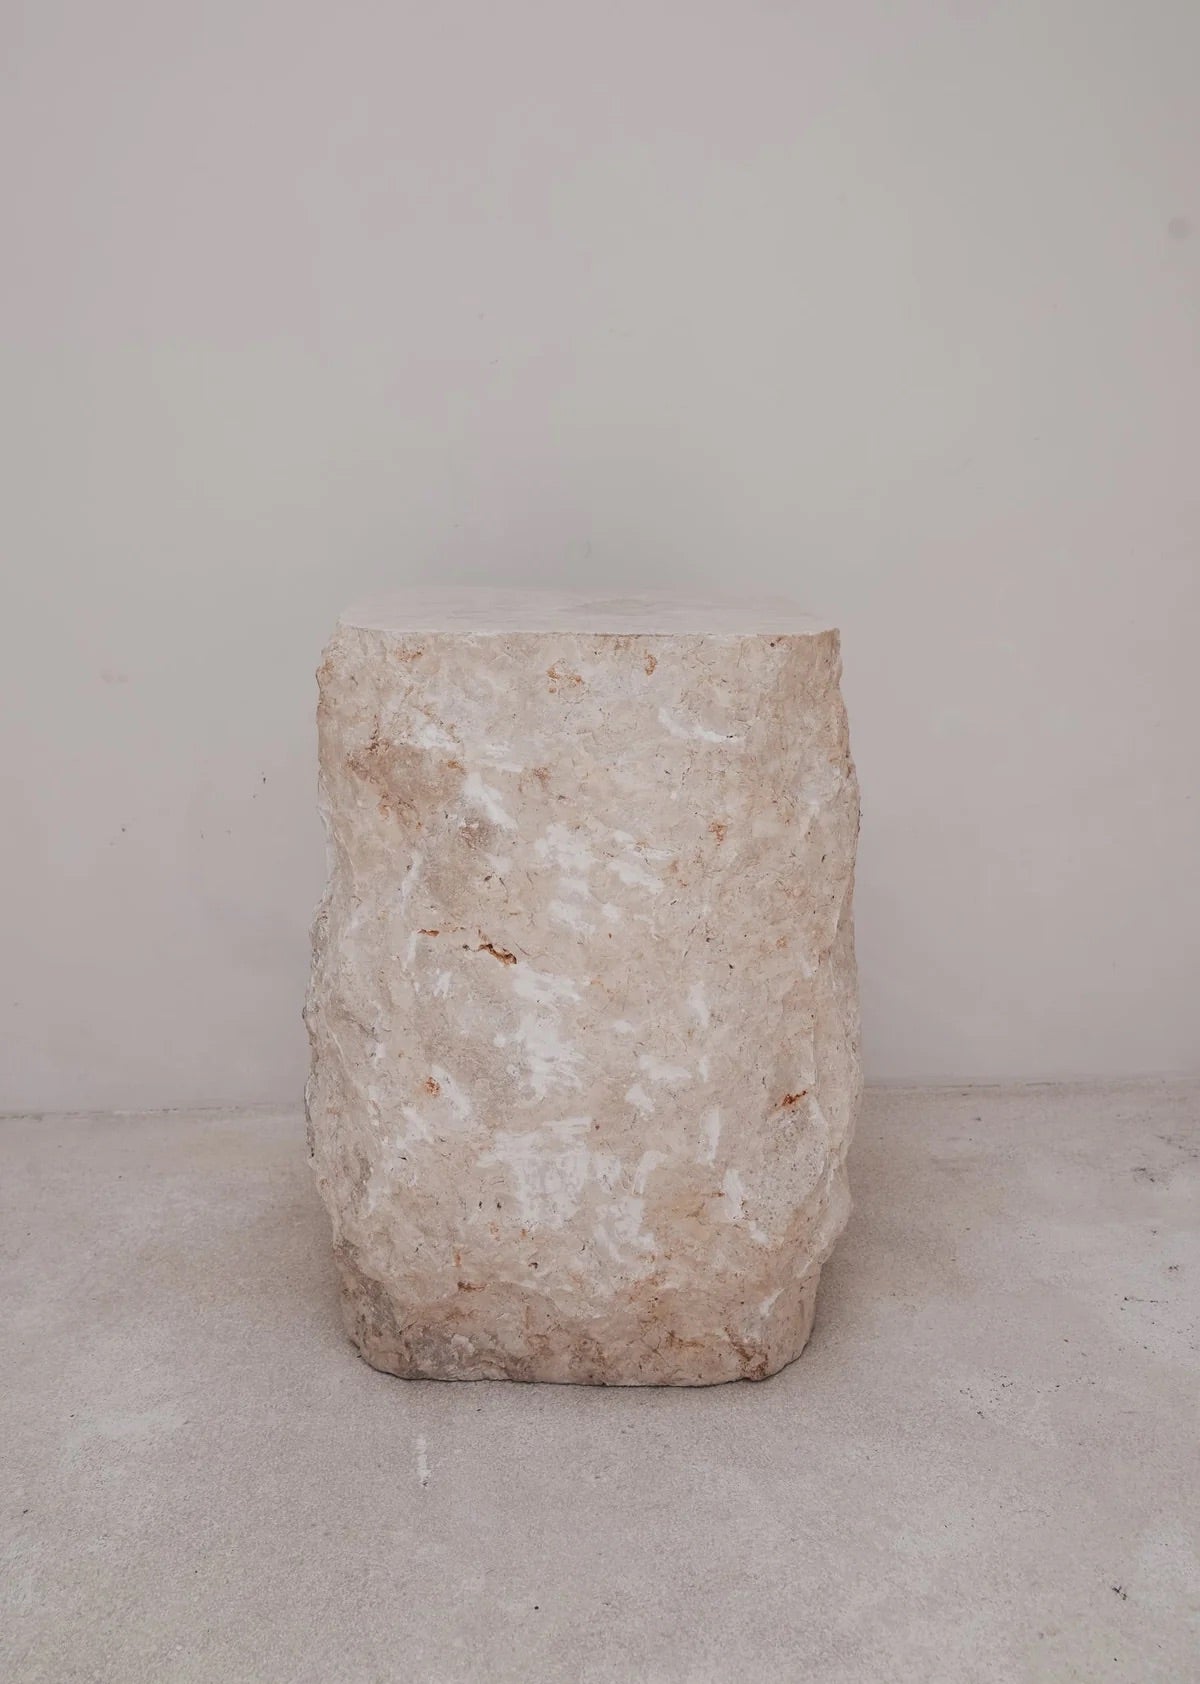 THE RAW STONE STOOL/TABLE